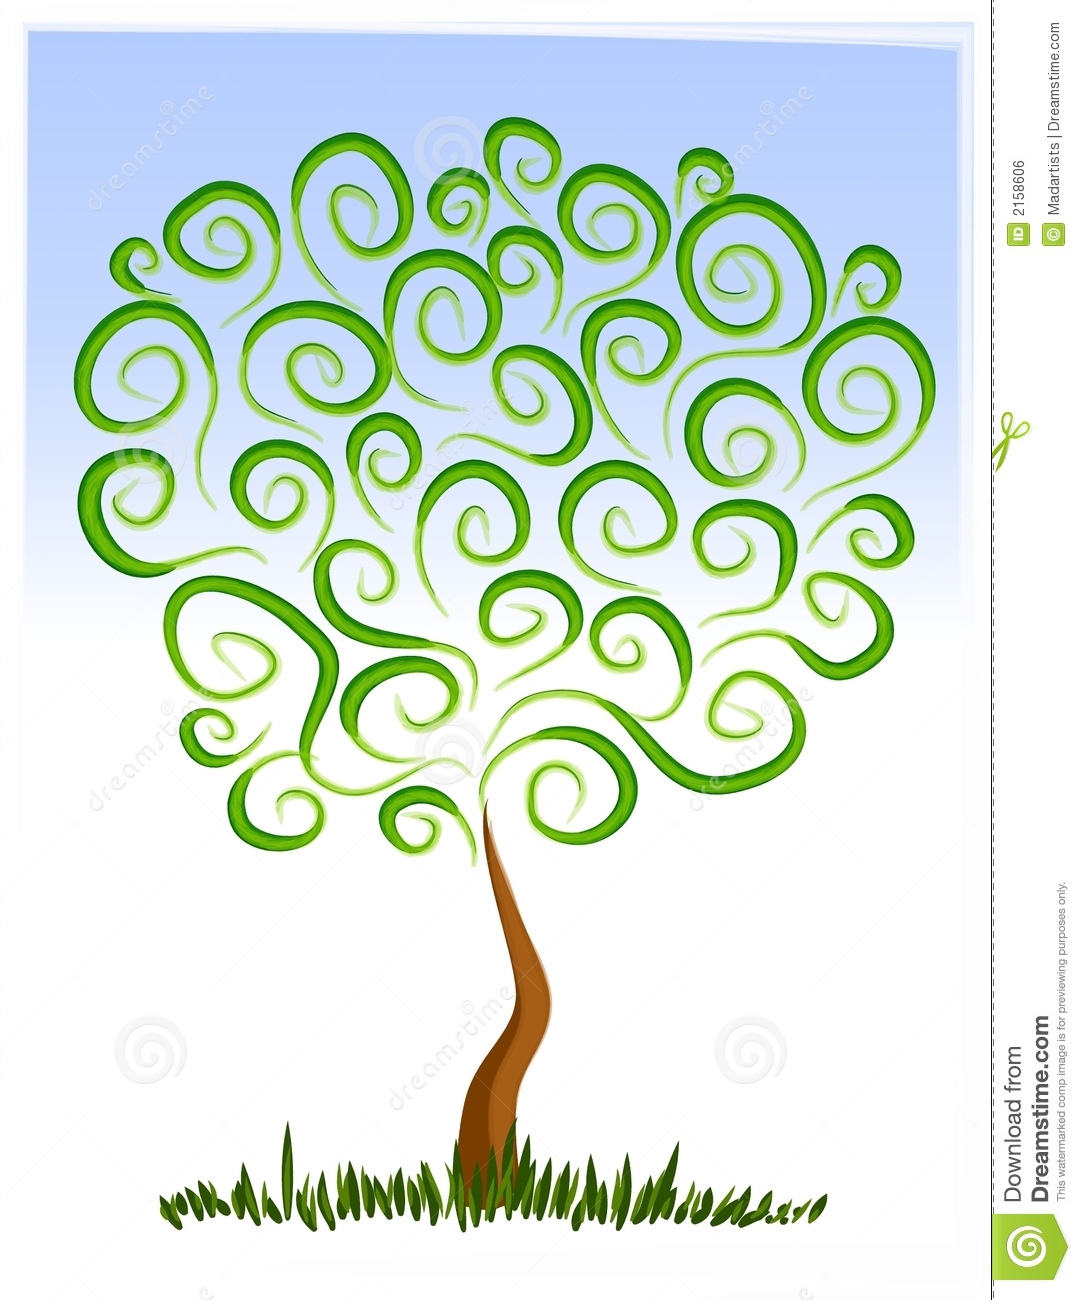 Abstract Tree Growing Clip Art Royalty Free Stock Image   Image